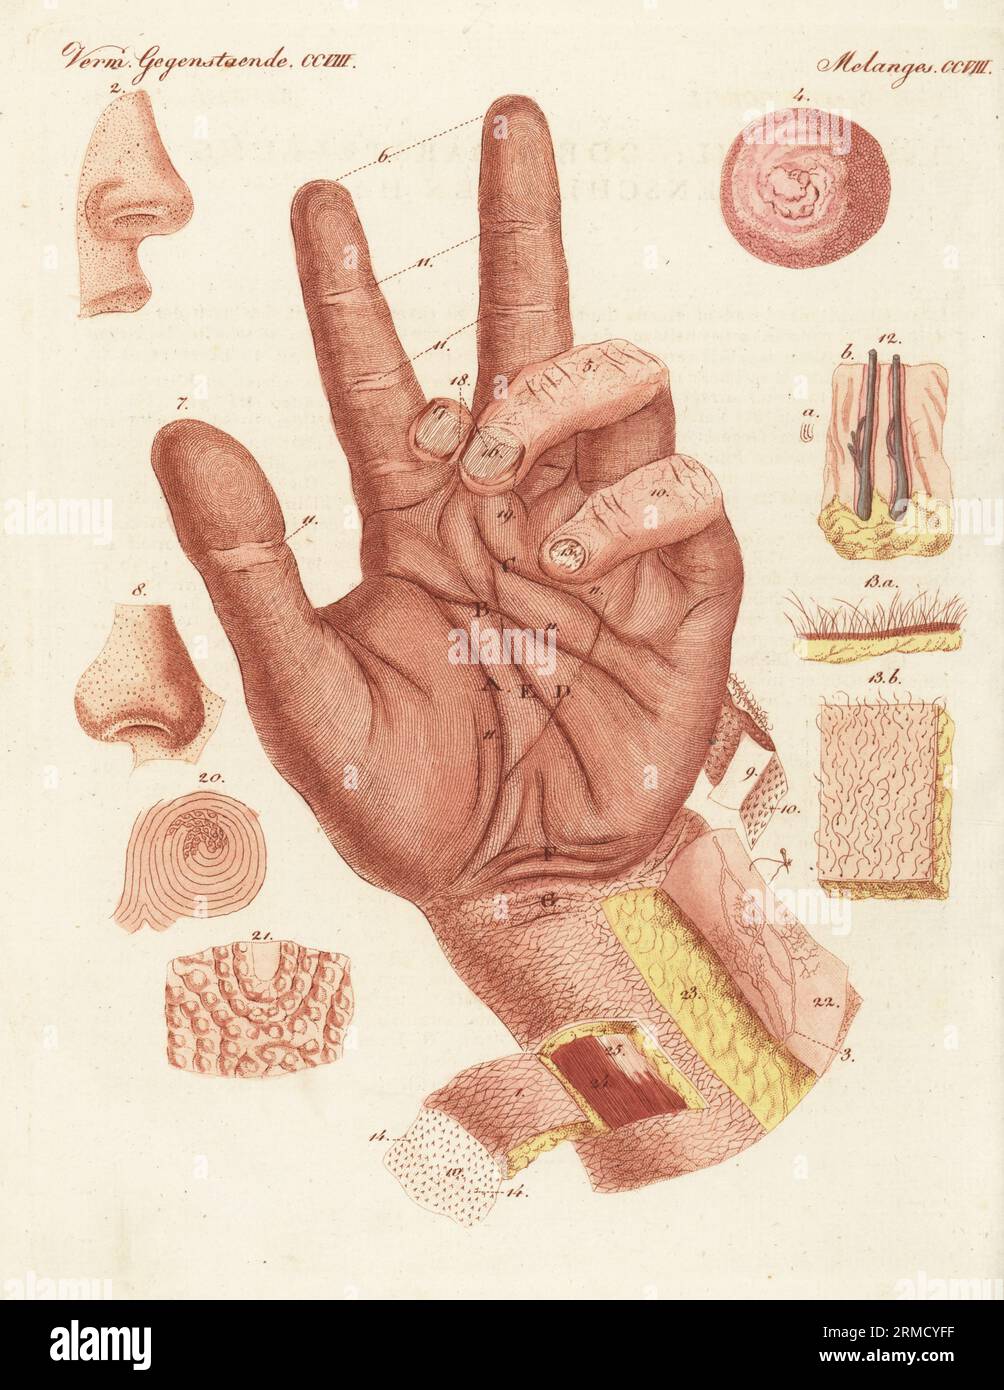 Anatomy of the sense of touch in human skin. Le tact, ou representation de la peau humaine. Skin pores 1,2, lymph vessels 3, nerves 4-7, fatty glands 8, epidermis 9-10, hair follicles 12,13, dermis 19, fingerprint 20. Handcoloured copperplate engraving from Carl Bertuch's Bilderbuch fur Kinder (Picture Book for Children), Weimar, 1815. A 12-volume encyclopedia for children illustrated with almost 1,200 engraved plates on natural history, science, costume, mythology, etc., published from 1790-1830. Stock Photo